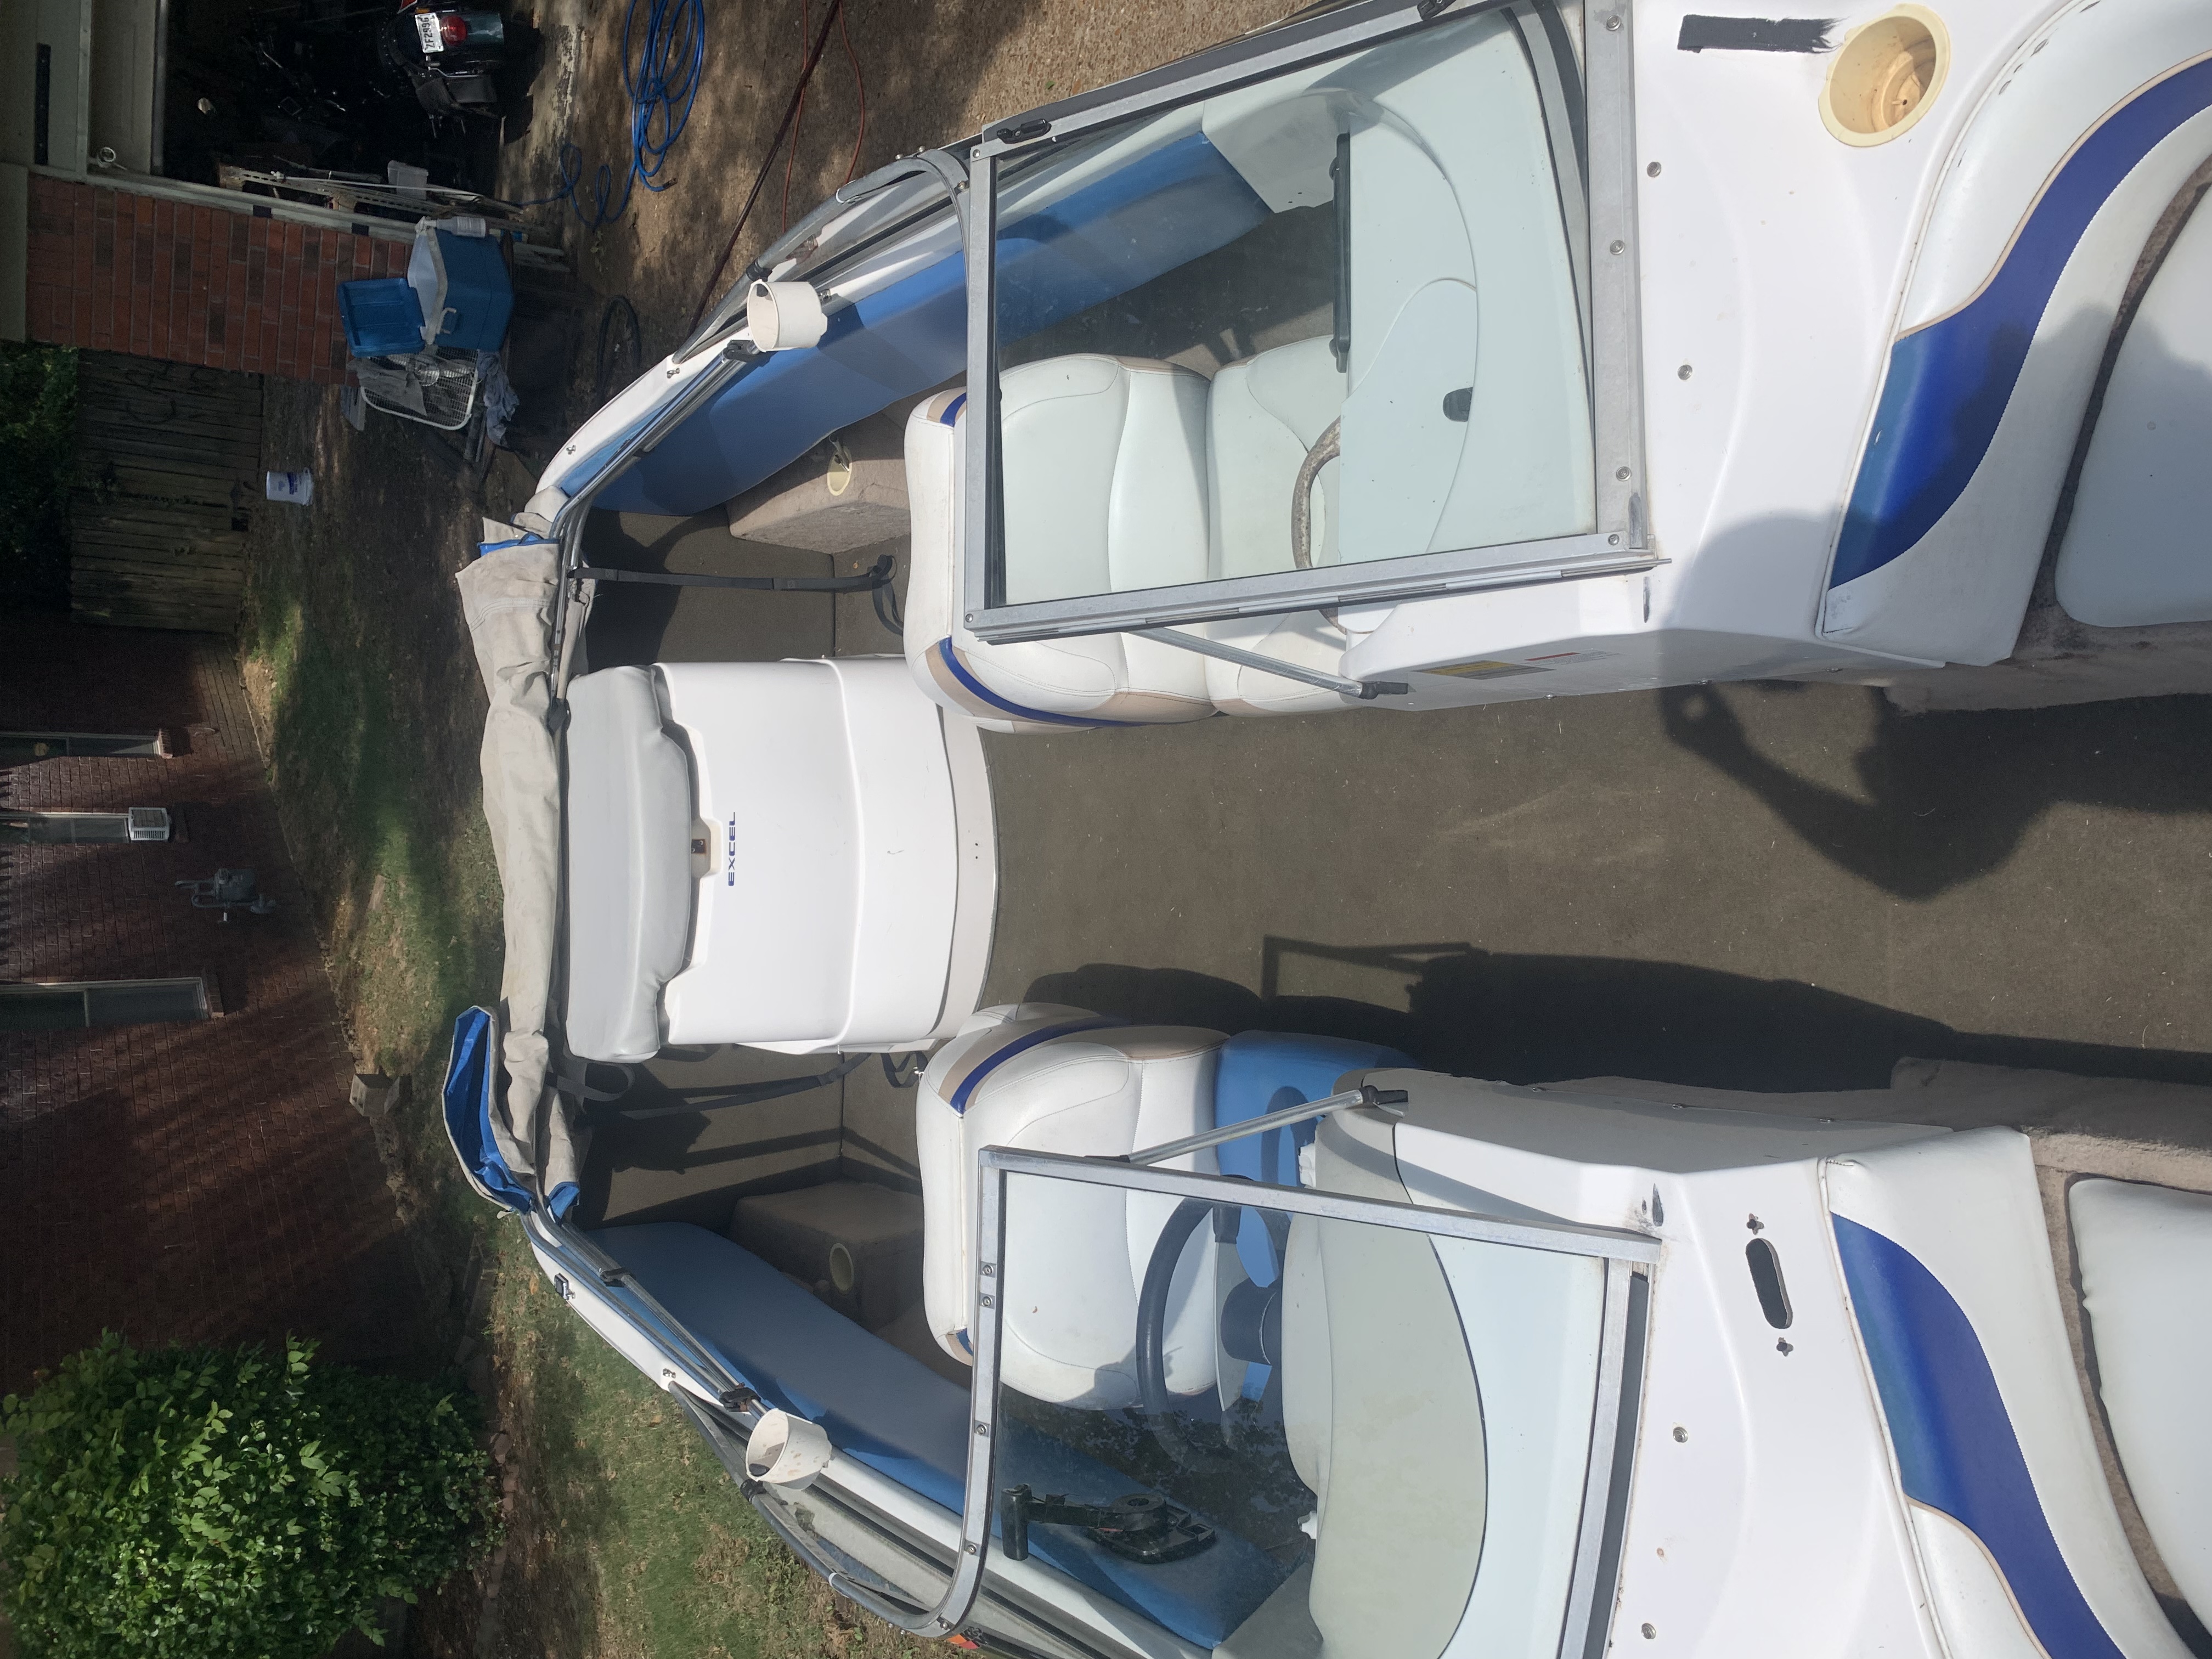 1996 Wellcraft Excel 19sx  Power boat for sale in Bartlett, TN - image 11 